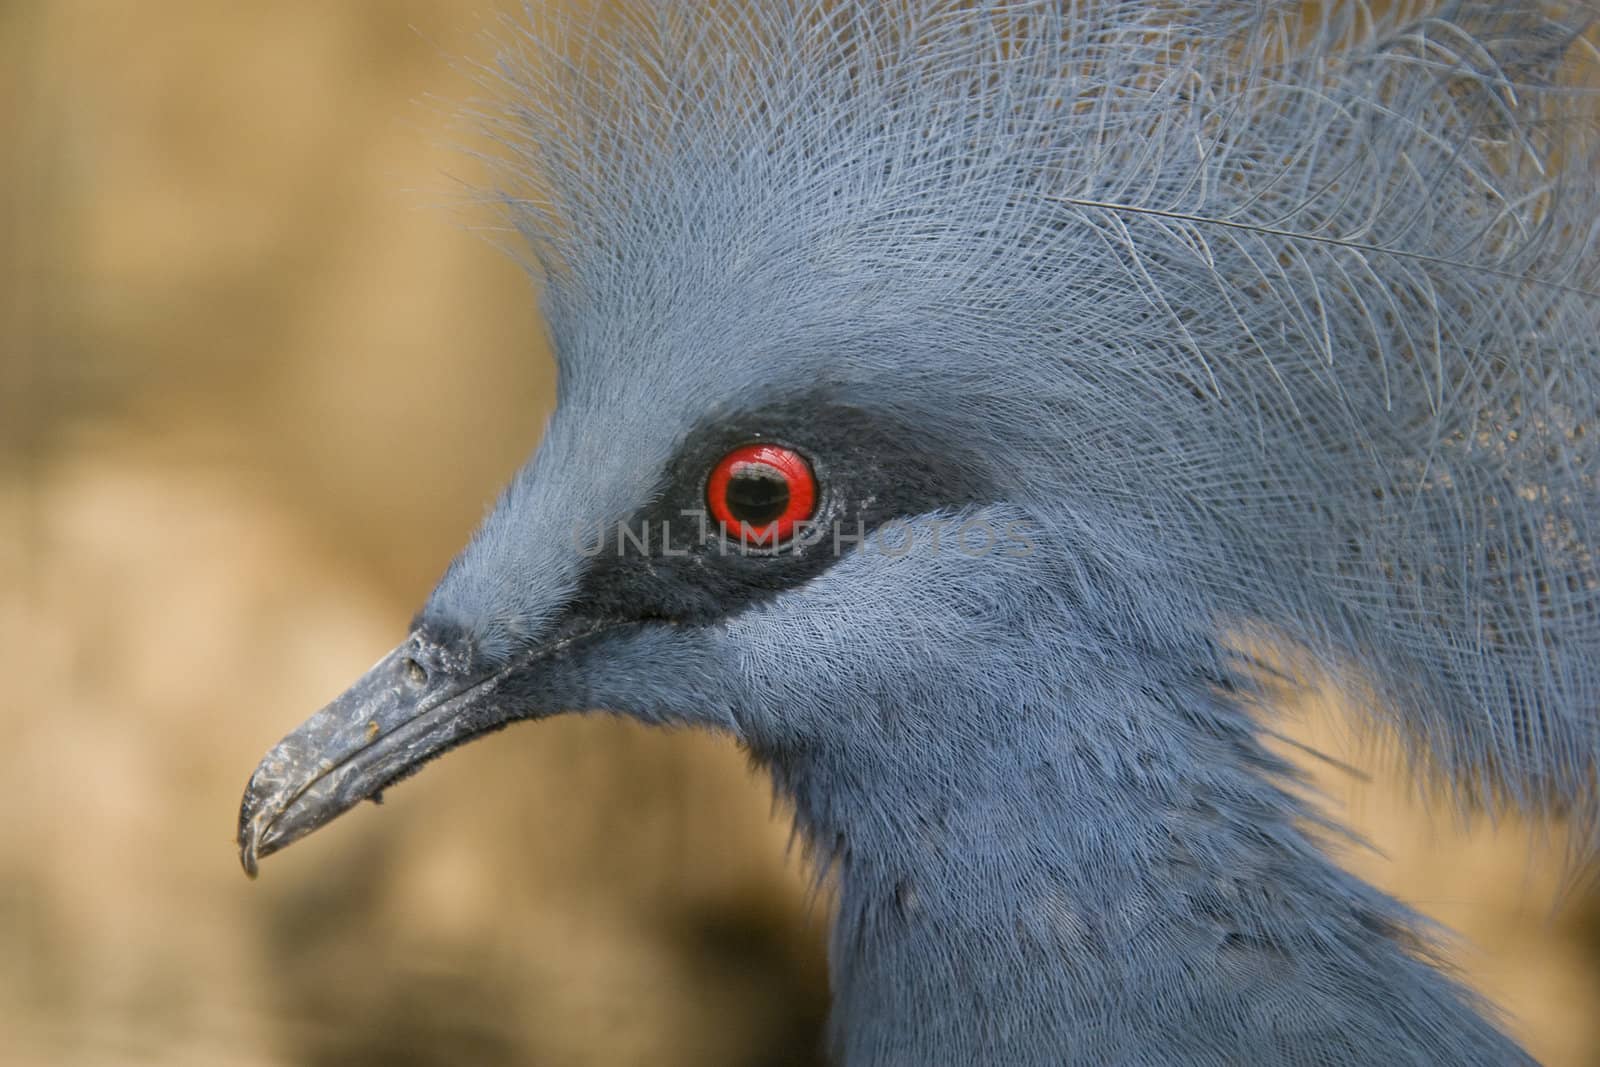 Western Crowned Pigeon (Goura Cristata)